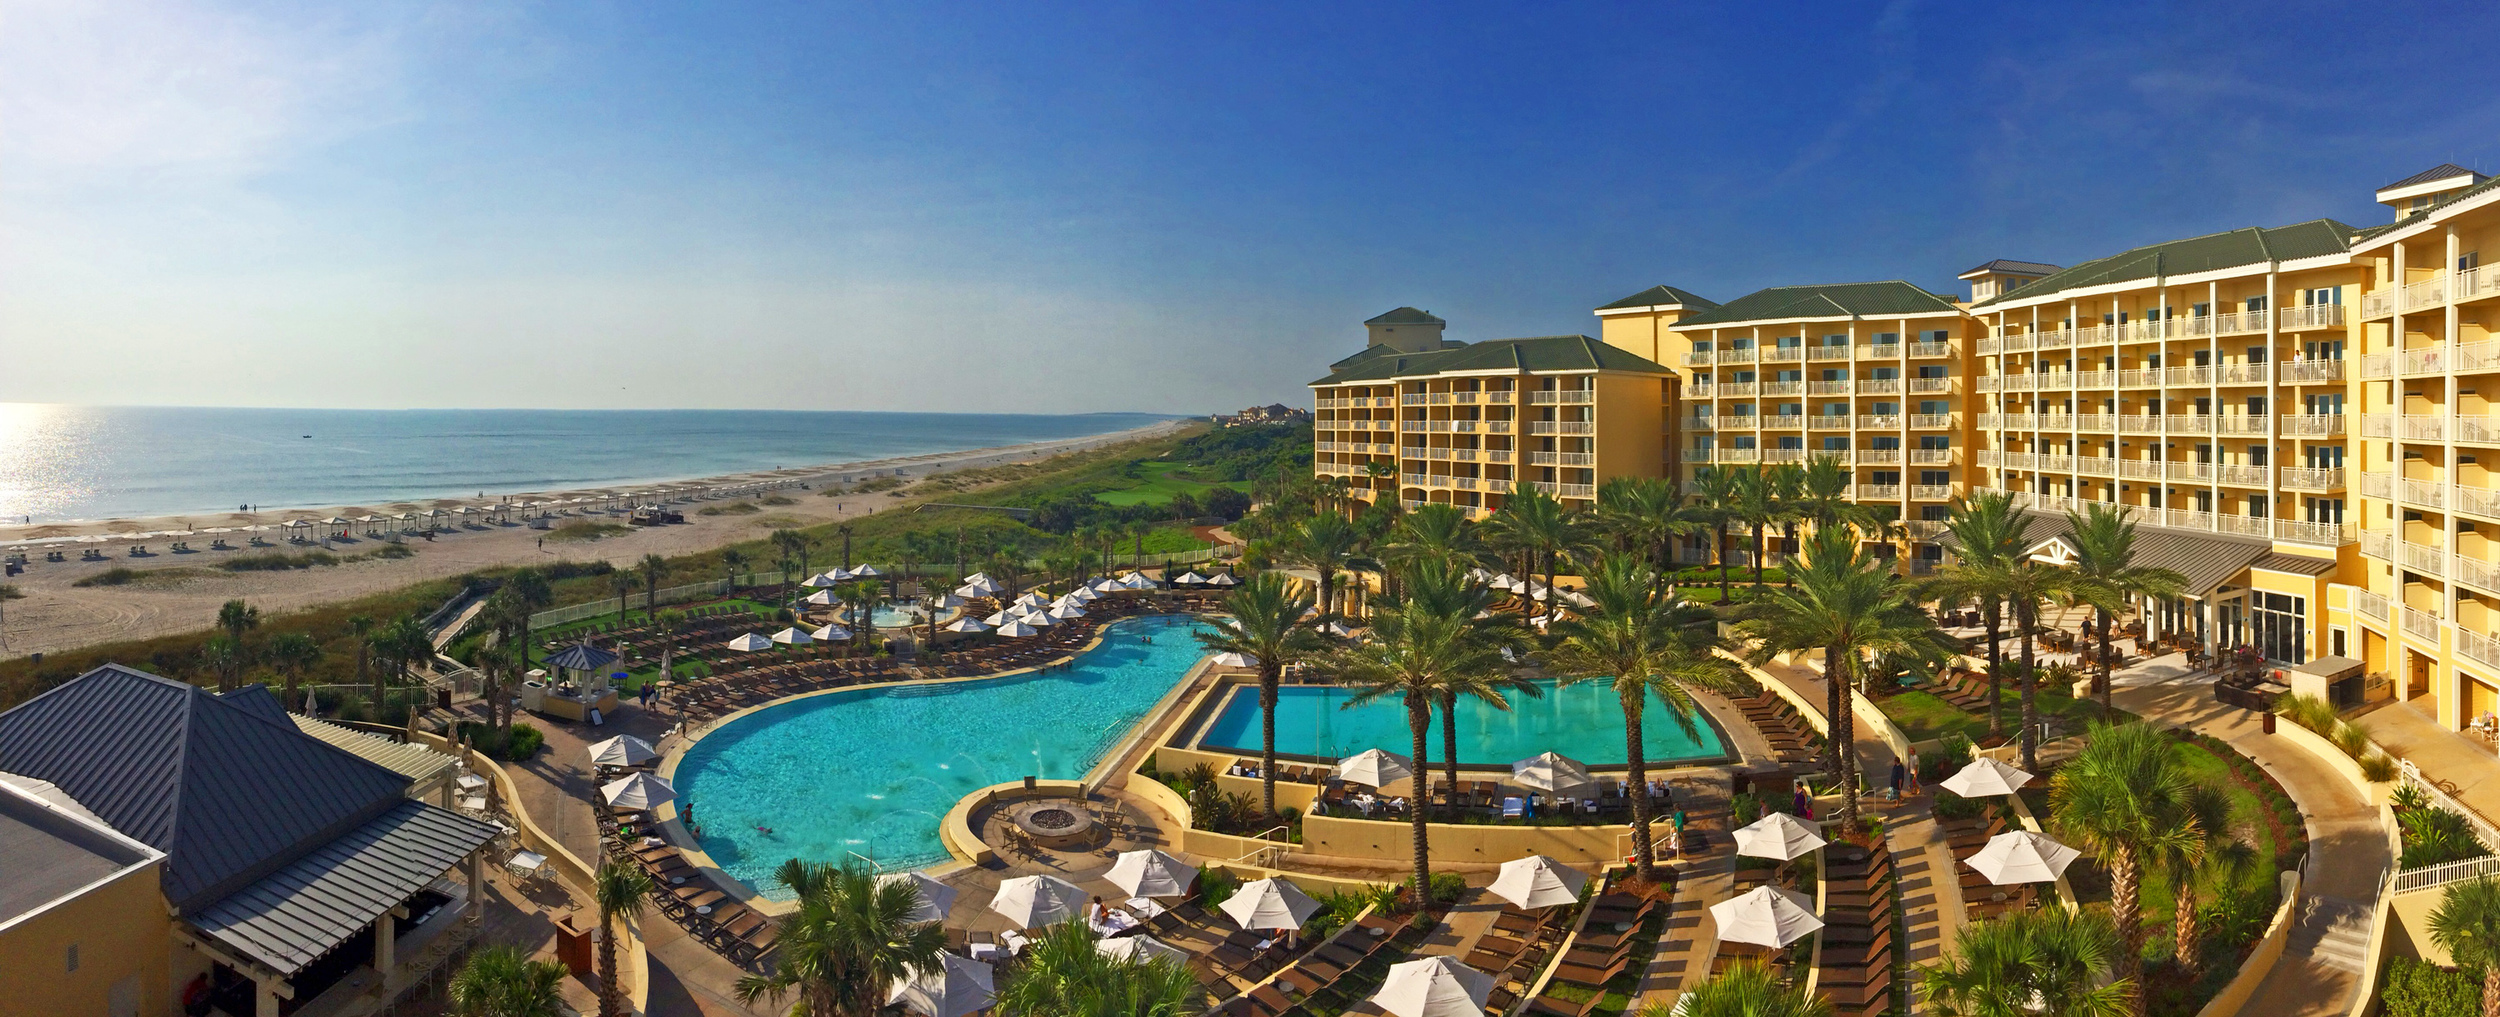 A drone shot of the Omni Amelia Island Plantation Resort in Florida, the site of a recent Tri-Marq event.